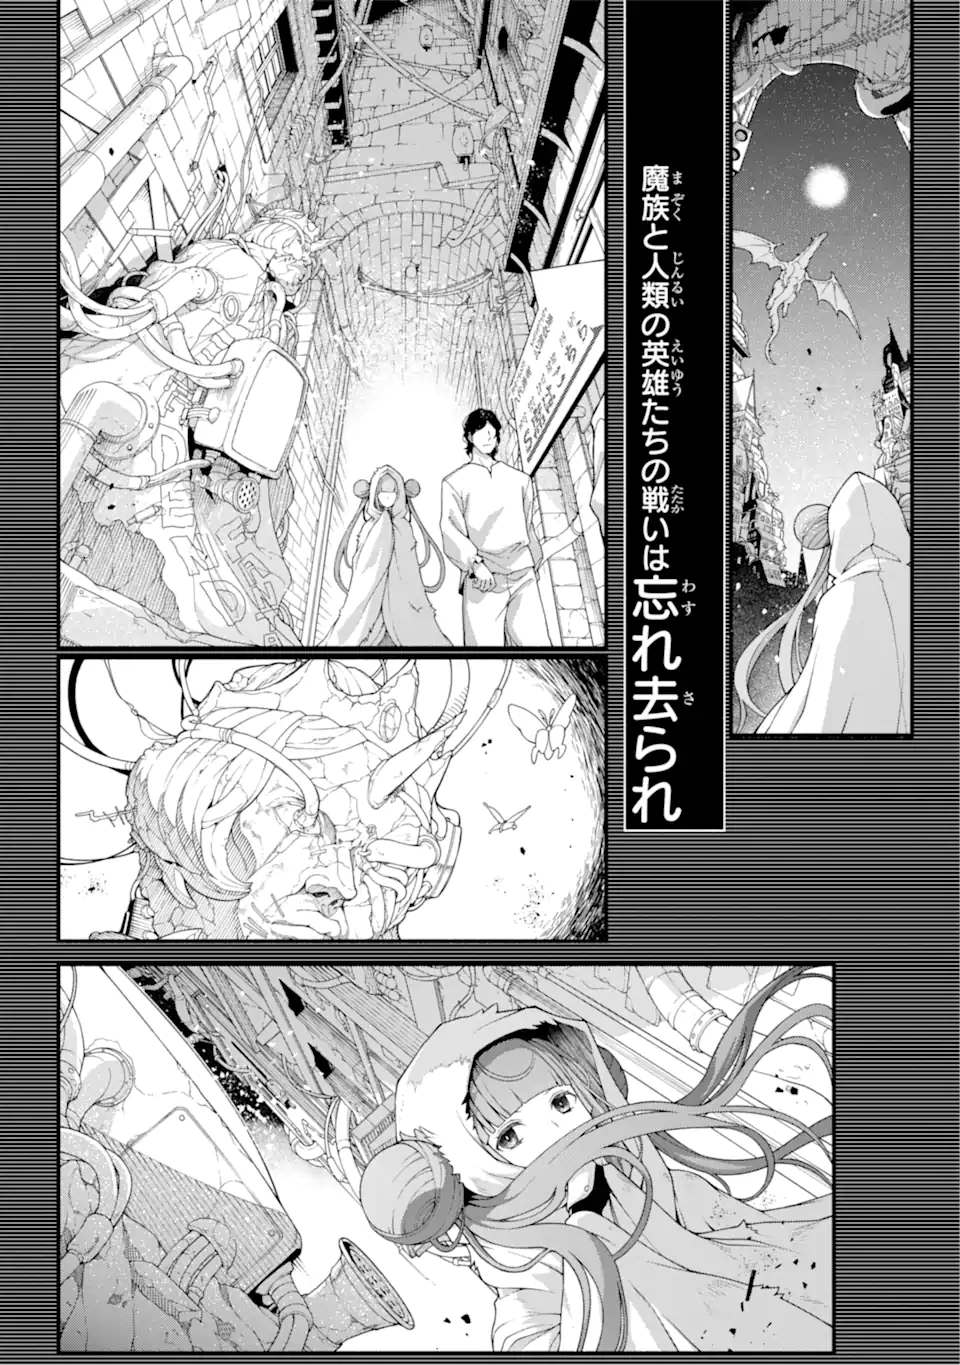 Isekai Cheat Breakers - Chapter 1.1 - Page 2